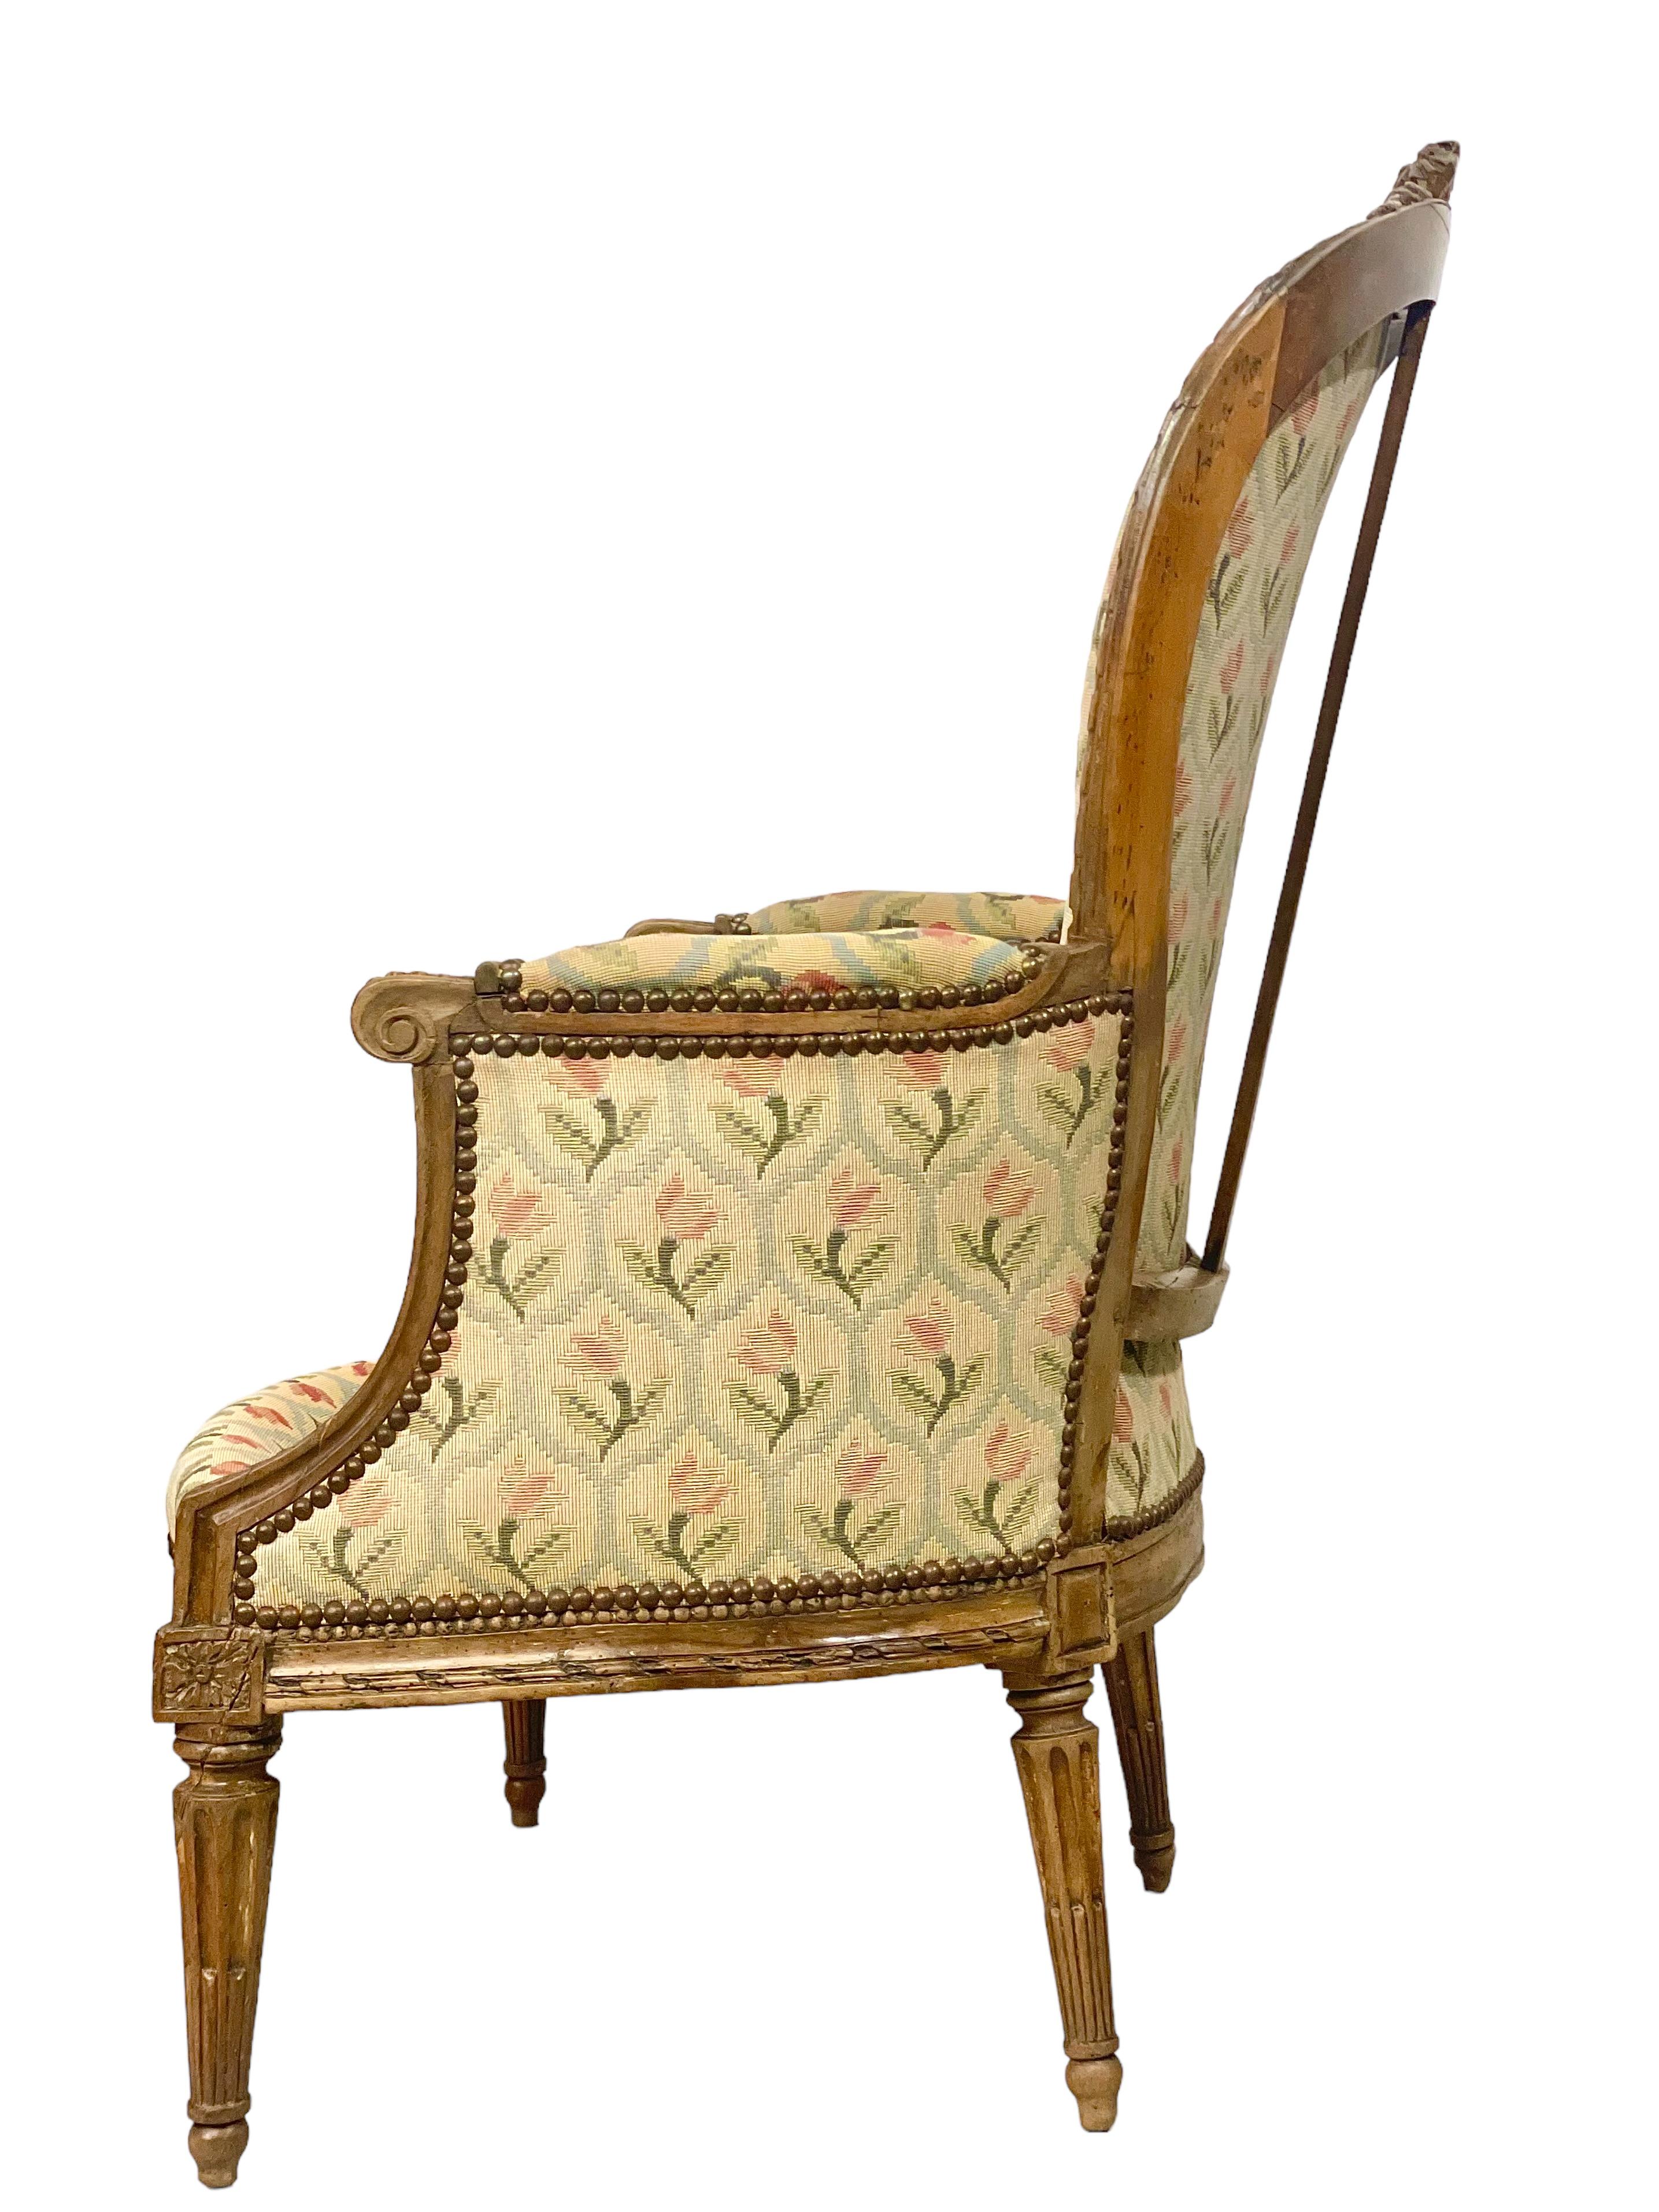 Louis XVI Period Bergere Chair 18th Century  For Sale 1